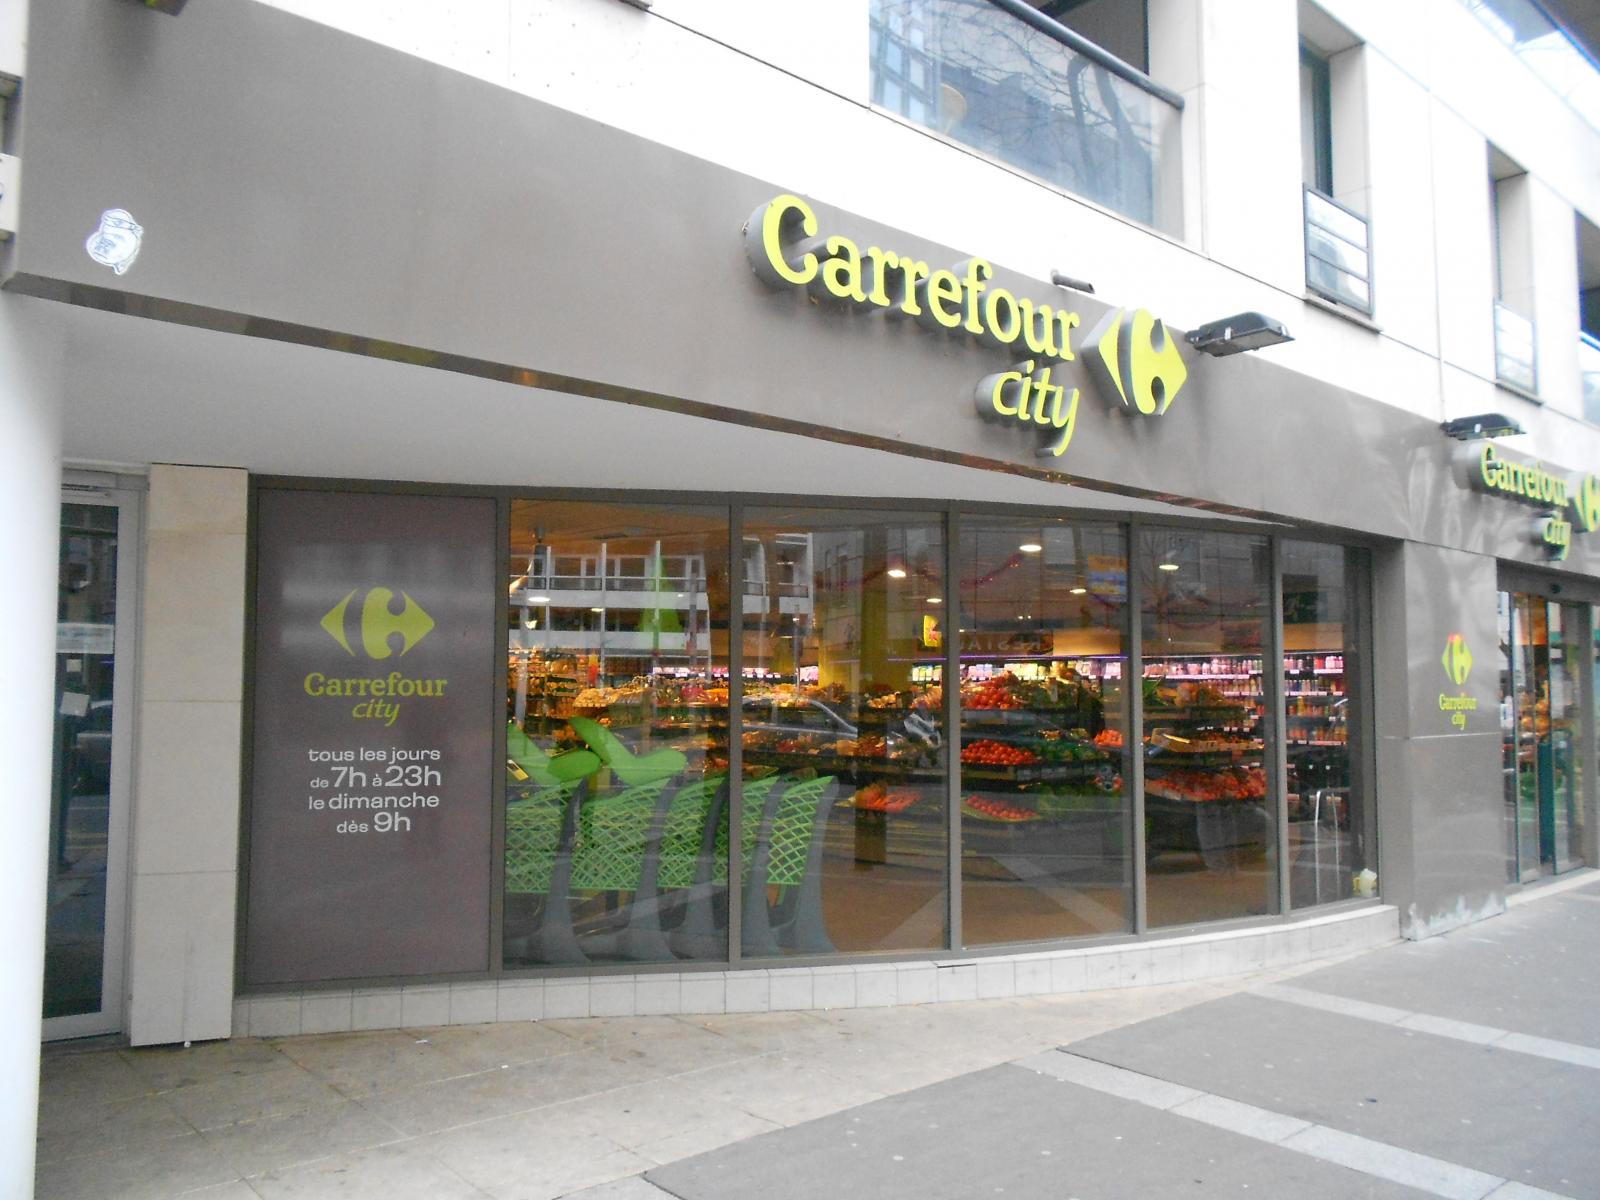  Carrefour  announces new City store in Paris  with organic 